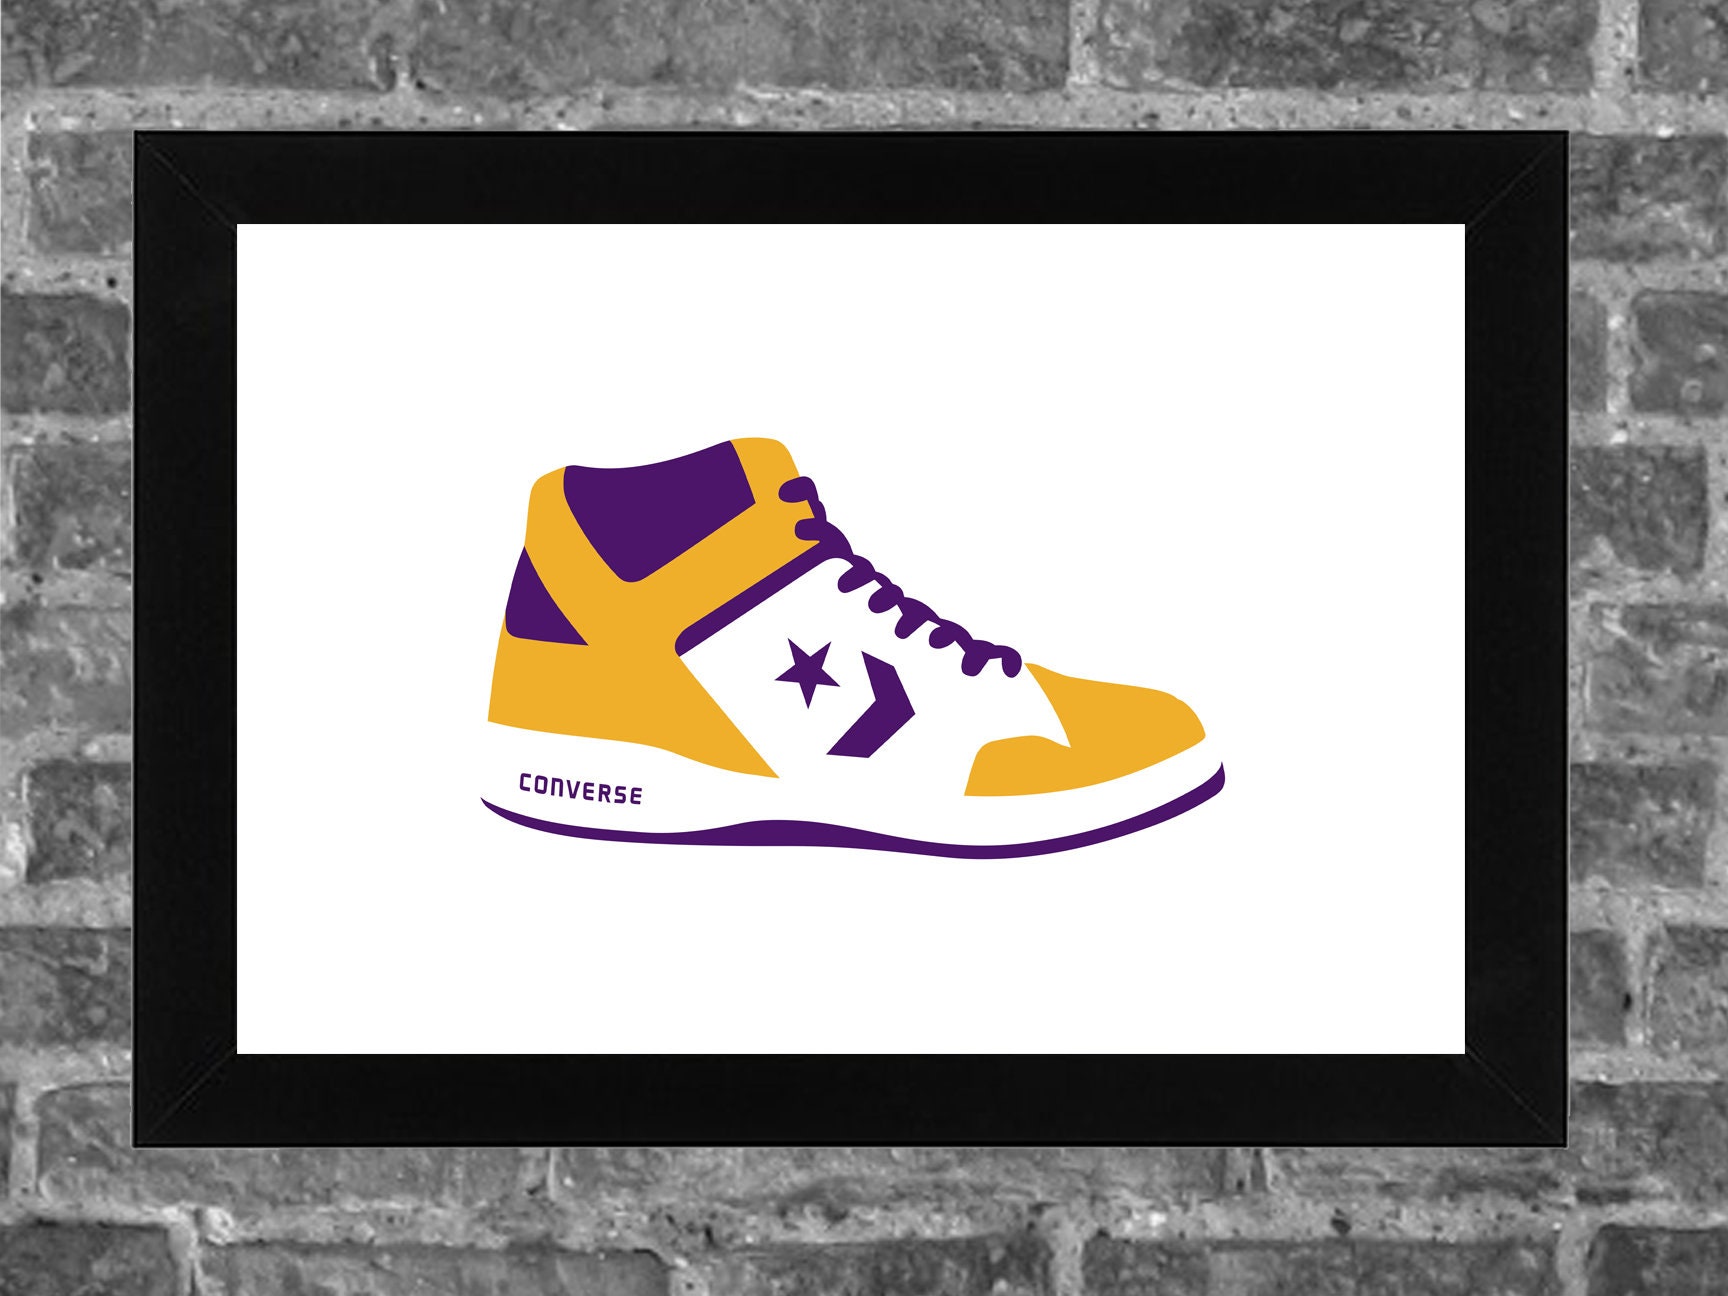 Buy Converse Shoe Johnson Showtime Los Angeles Lakers Online in - Etsy